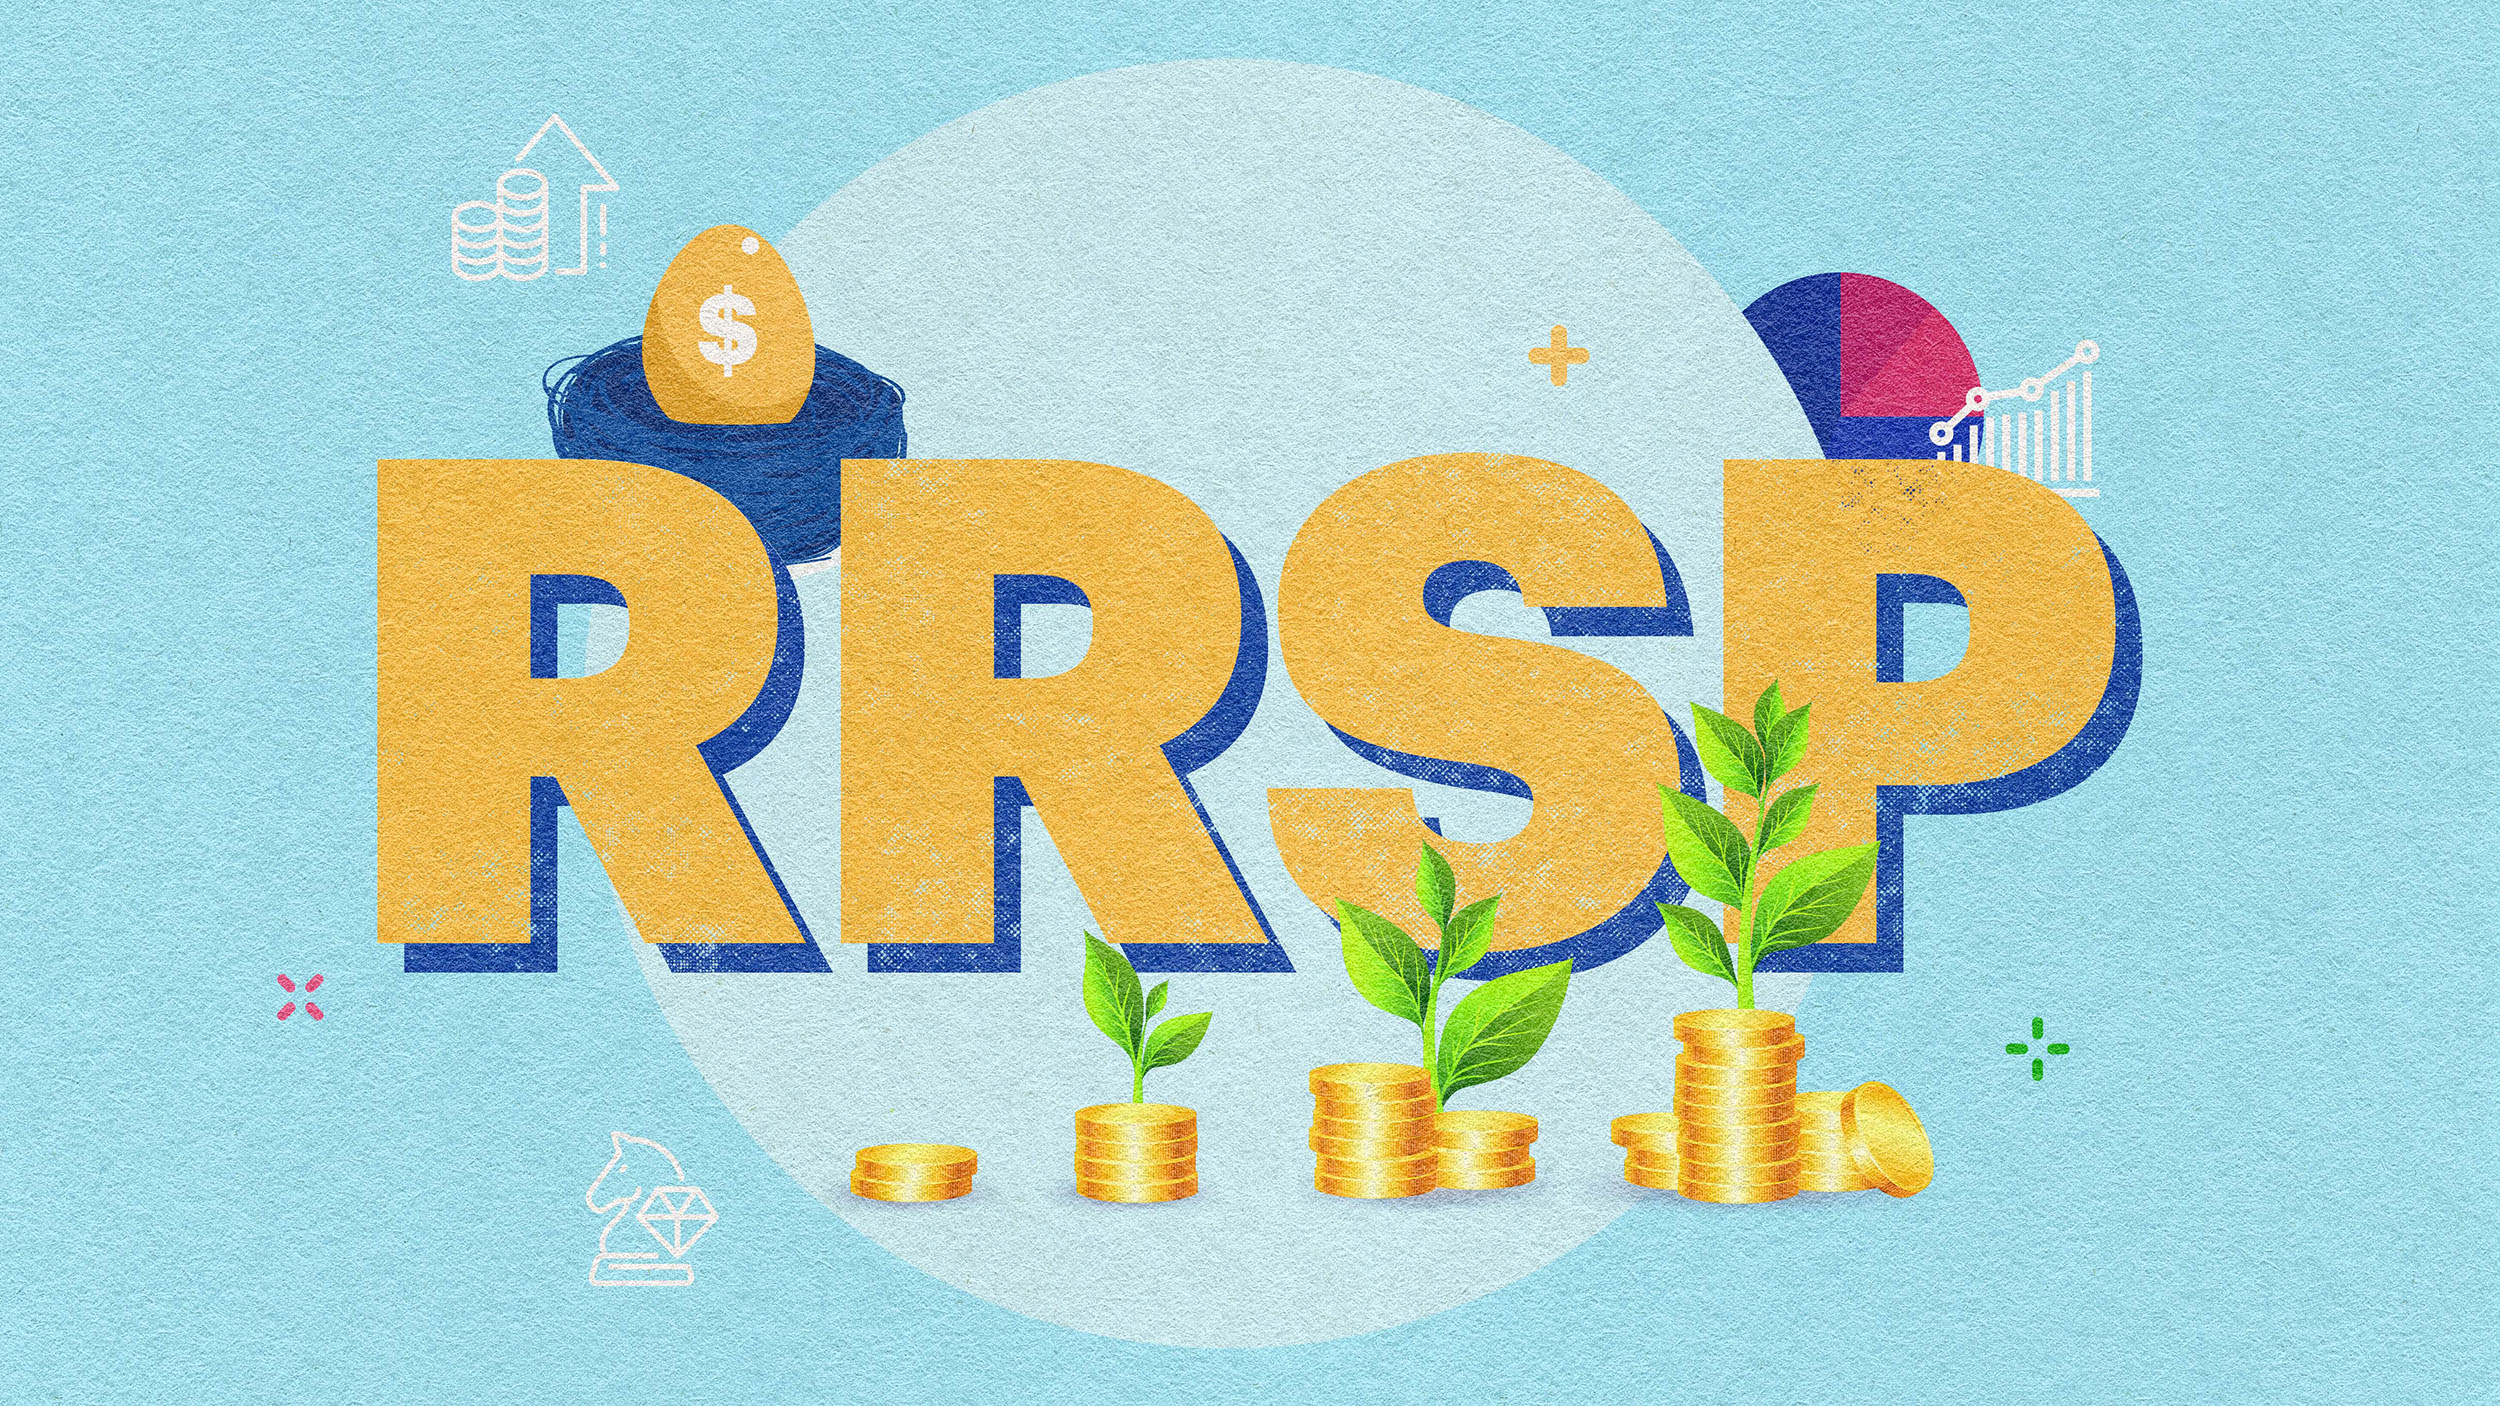 Illustration featuring large letters that read "RRSP" surrounded by pie charts, coin stacks, and a nest with a golden egg.